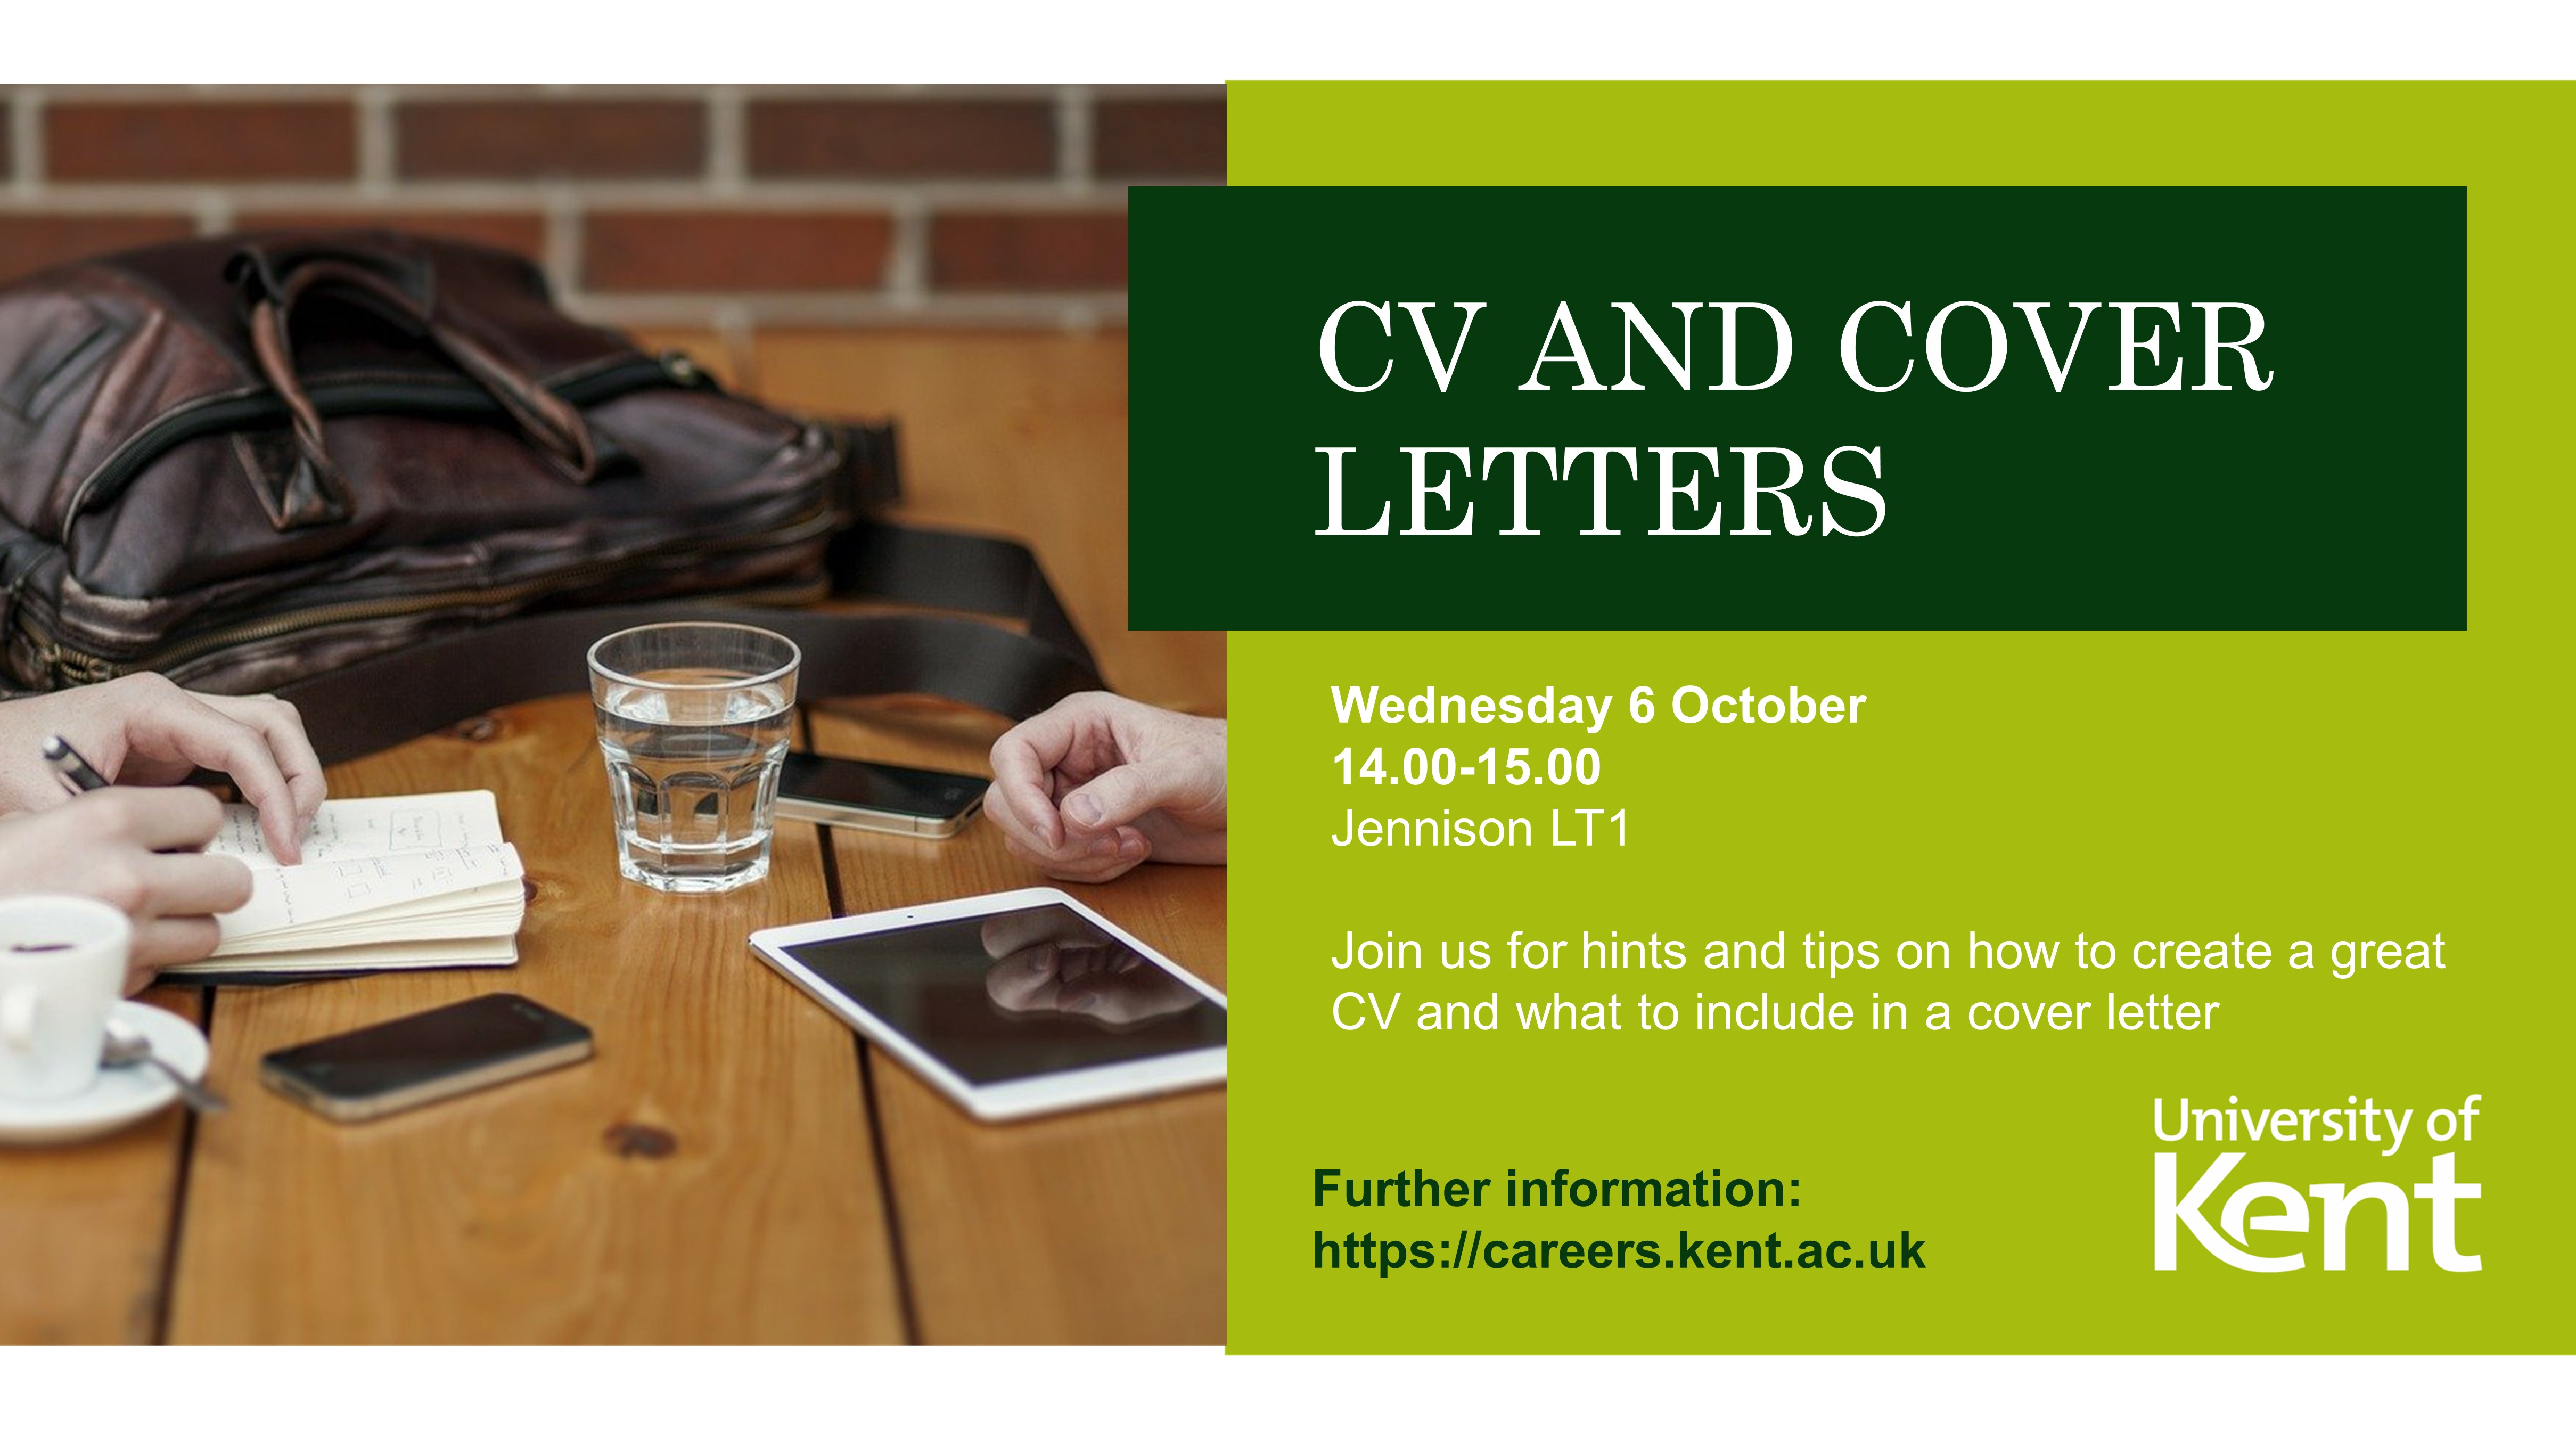 CV and cover letters poster